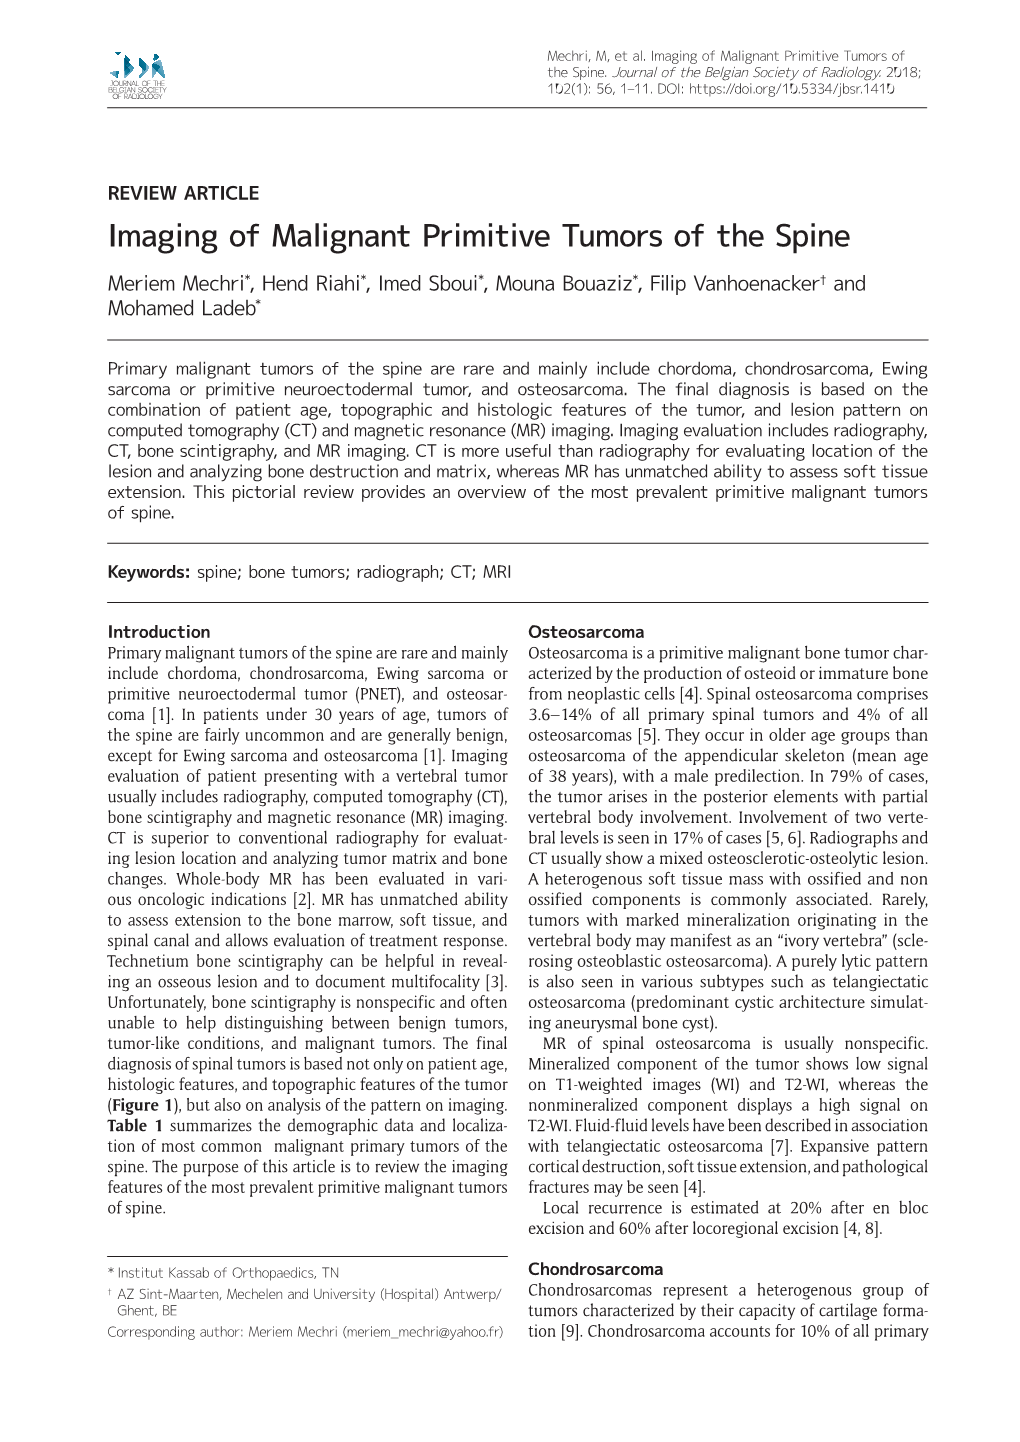 Imaging of Malignant Primitive Tumors of the Spine